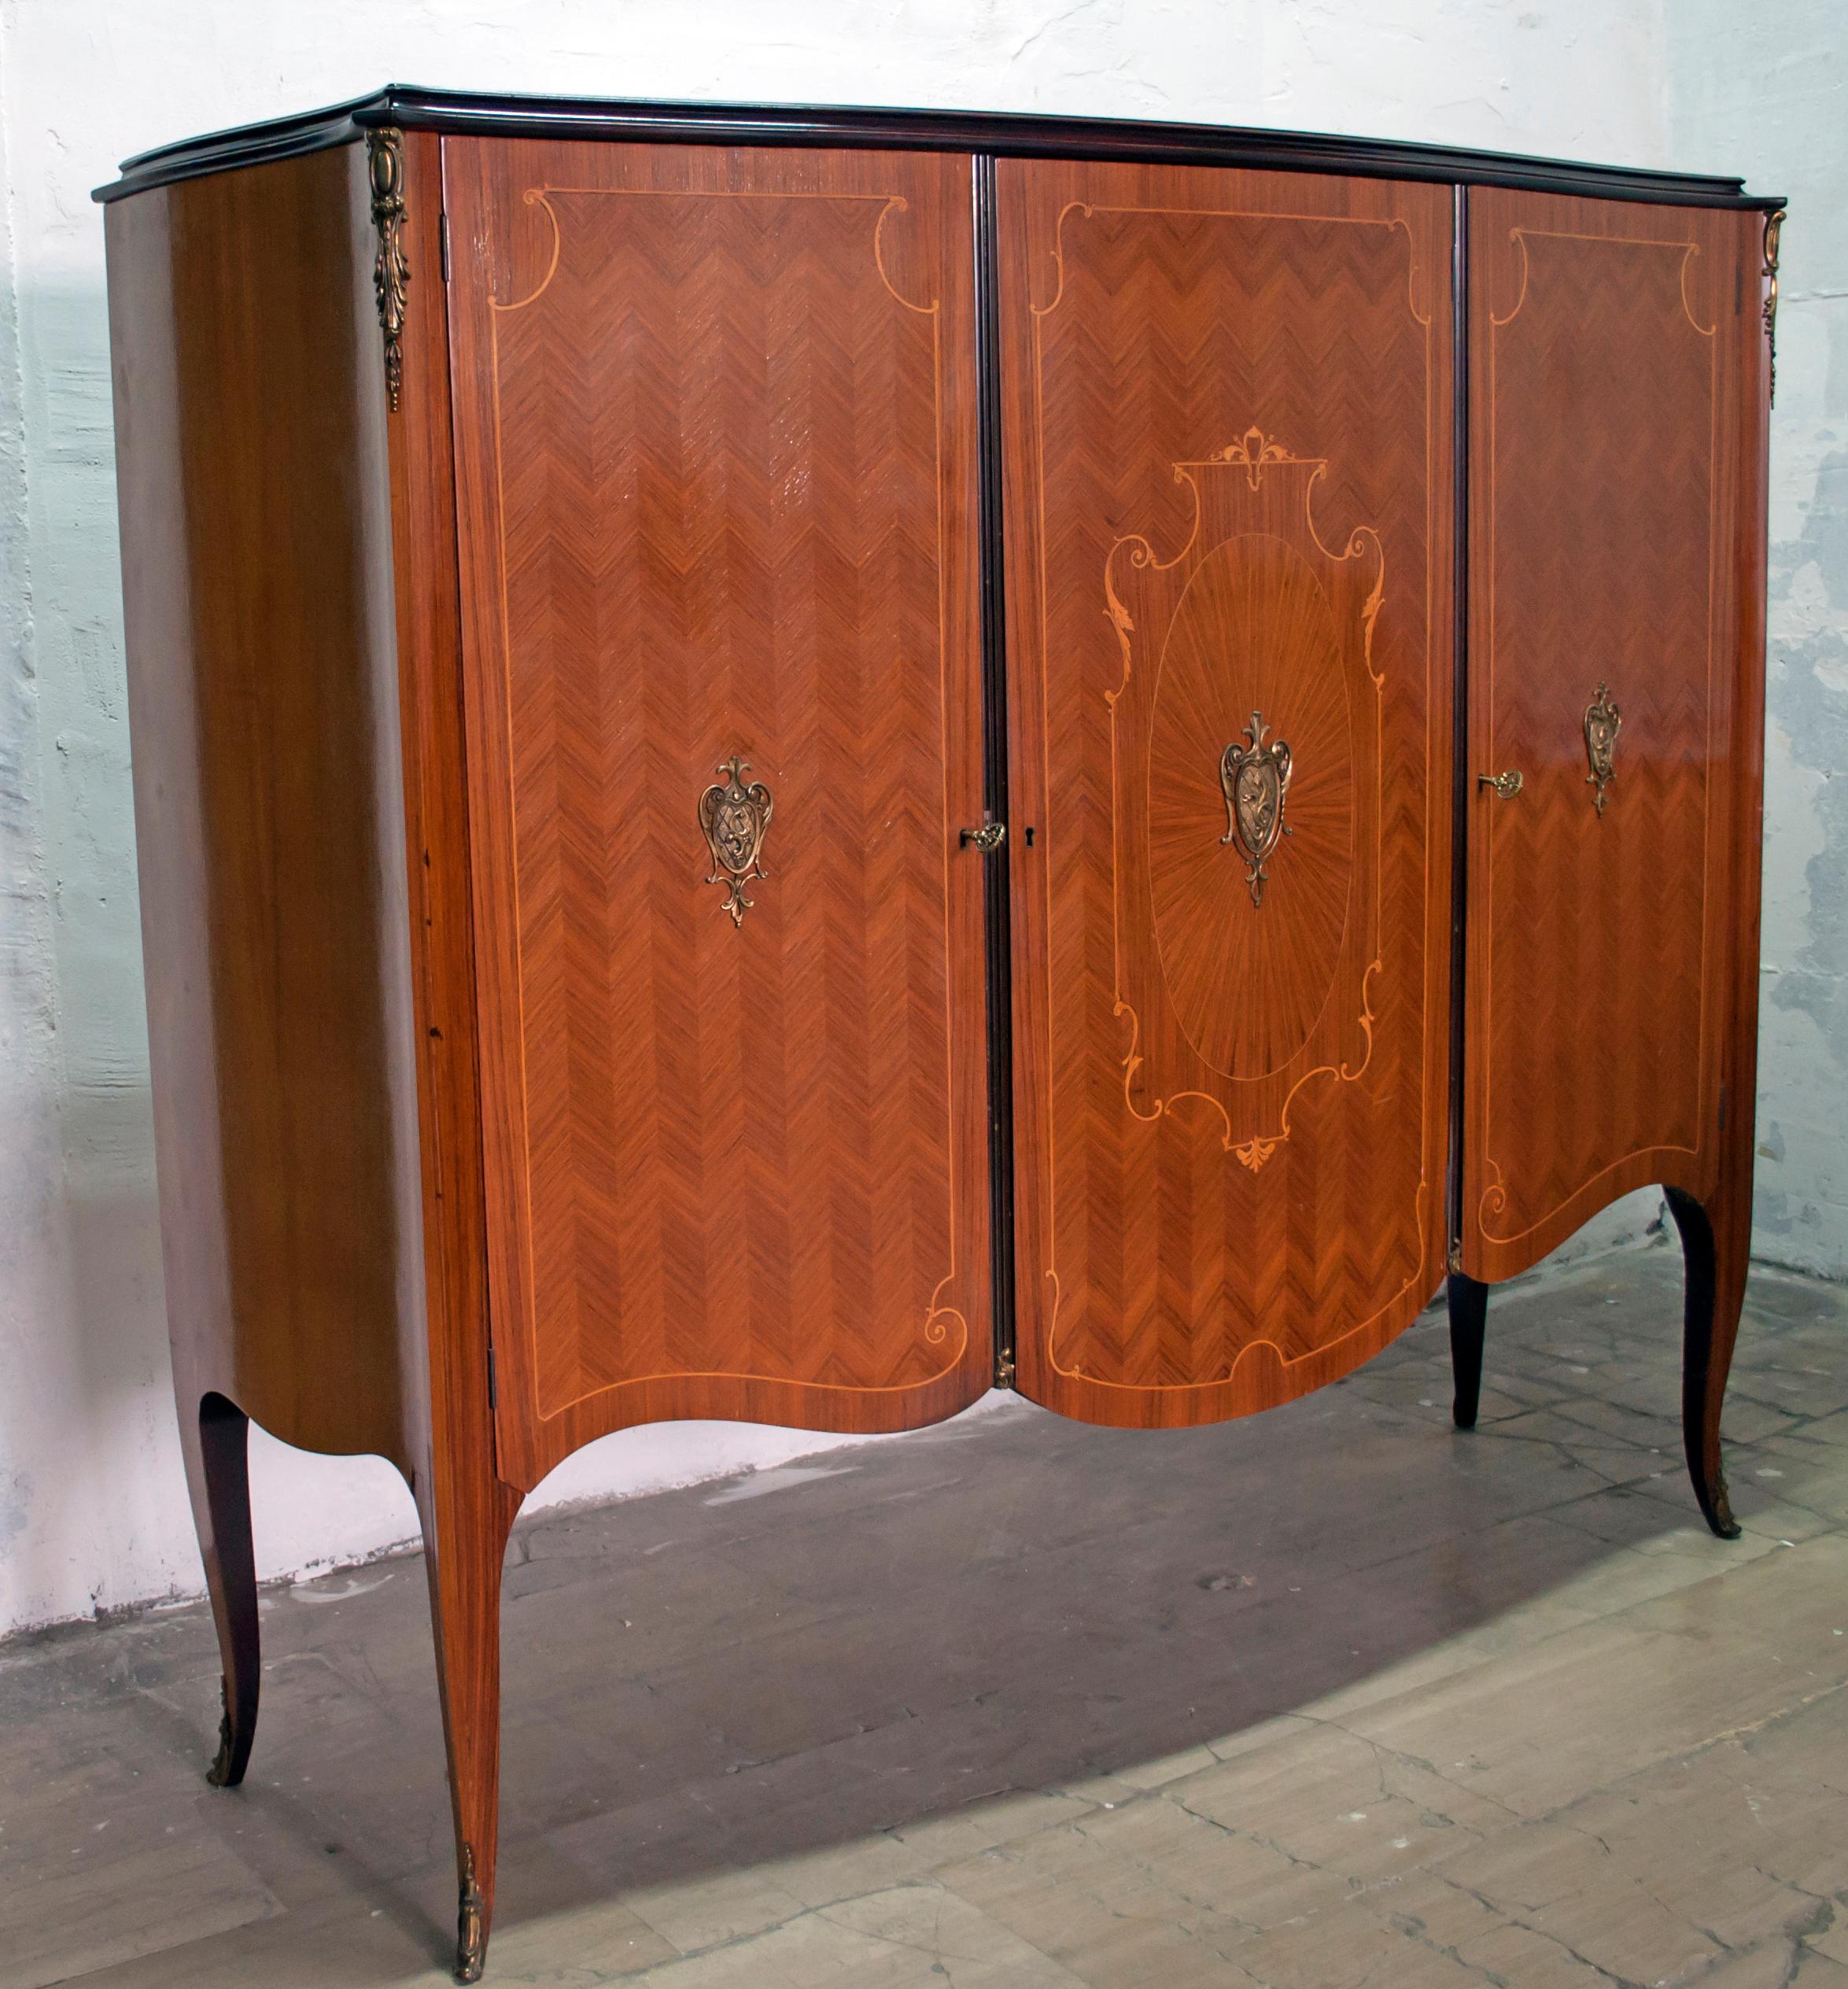 This bar cabinet, designed and produced in the 1950s, is made of walnut and poplar.

